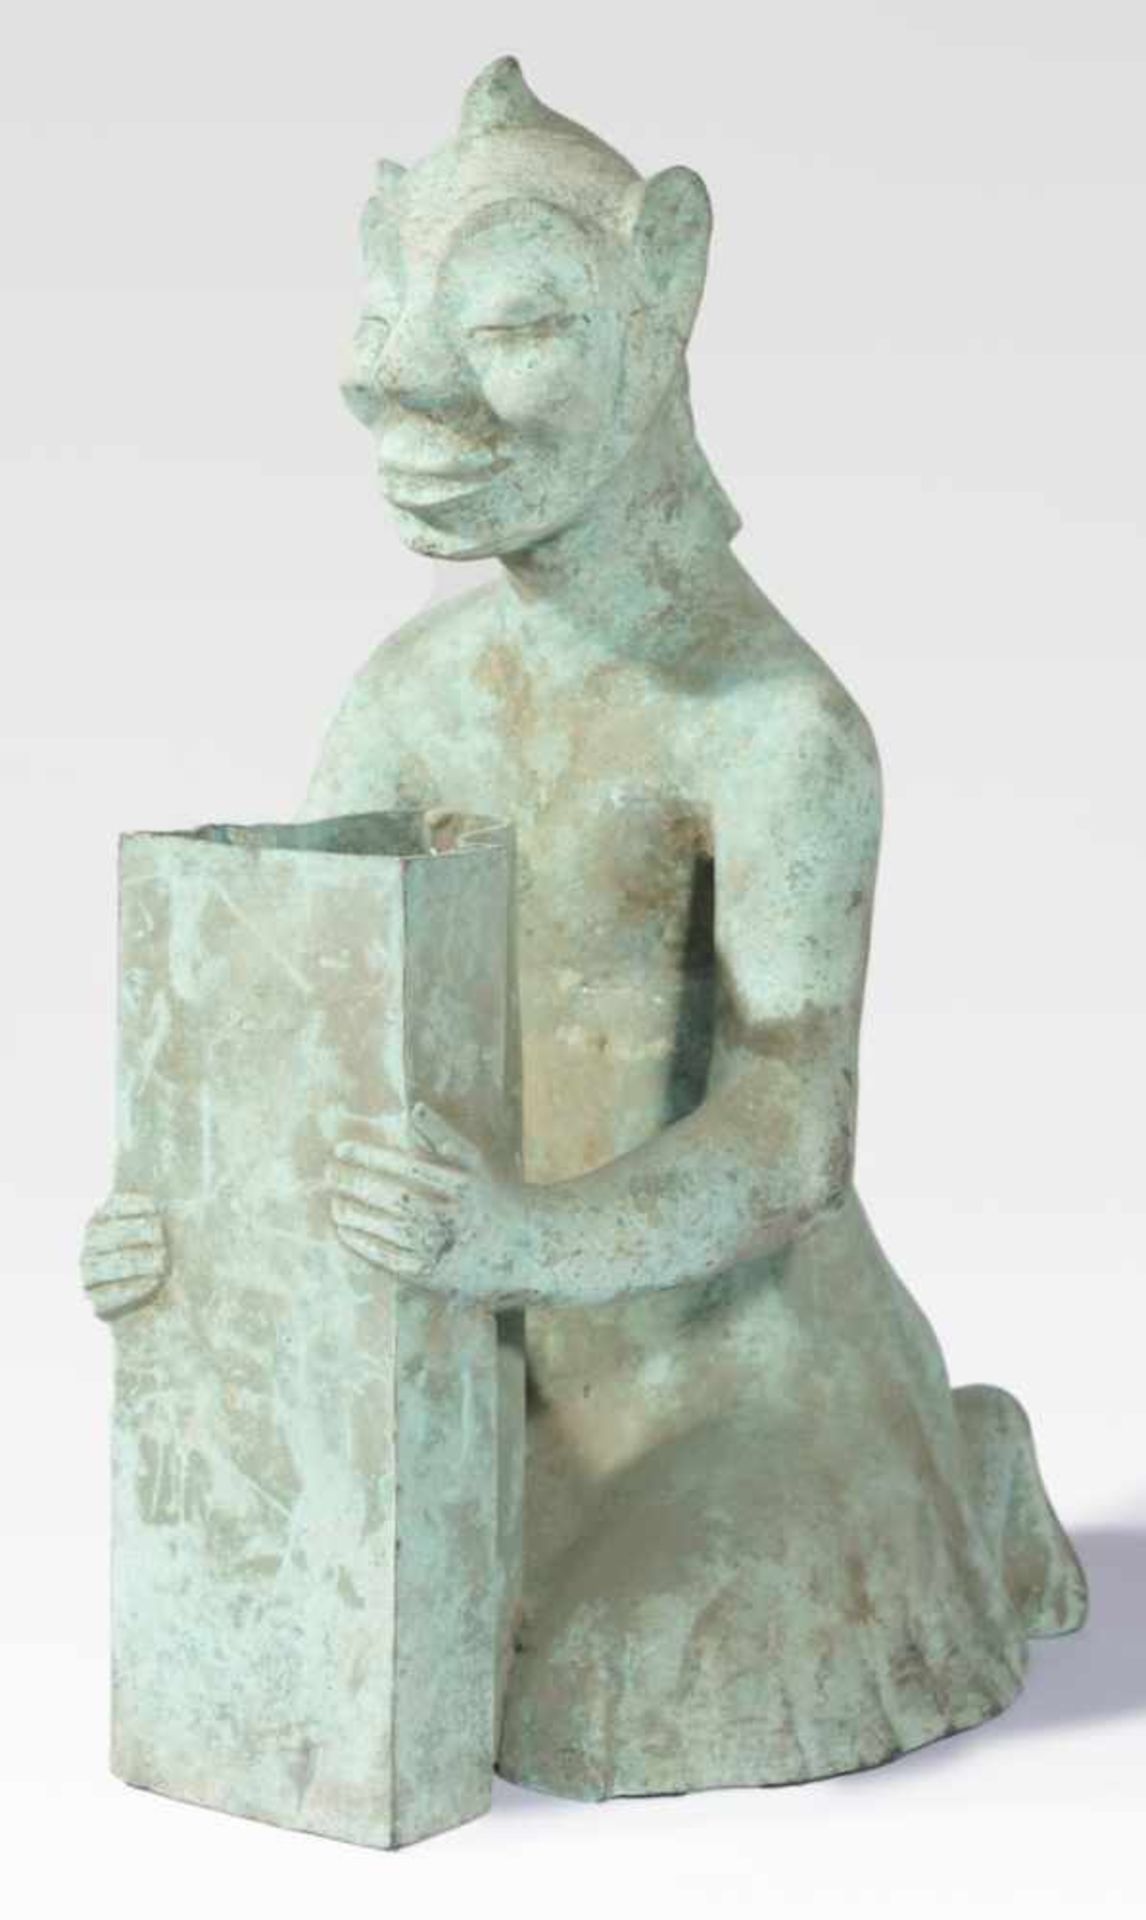 Manservant with vessel, China, Bronze, 20th c, 47 cm high, Provenance: Private collection